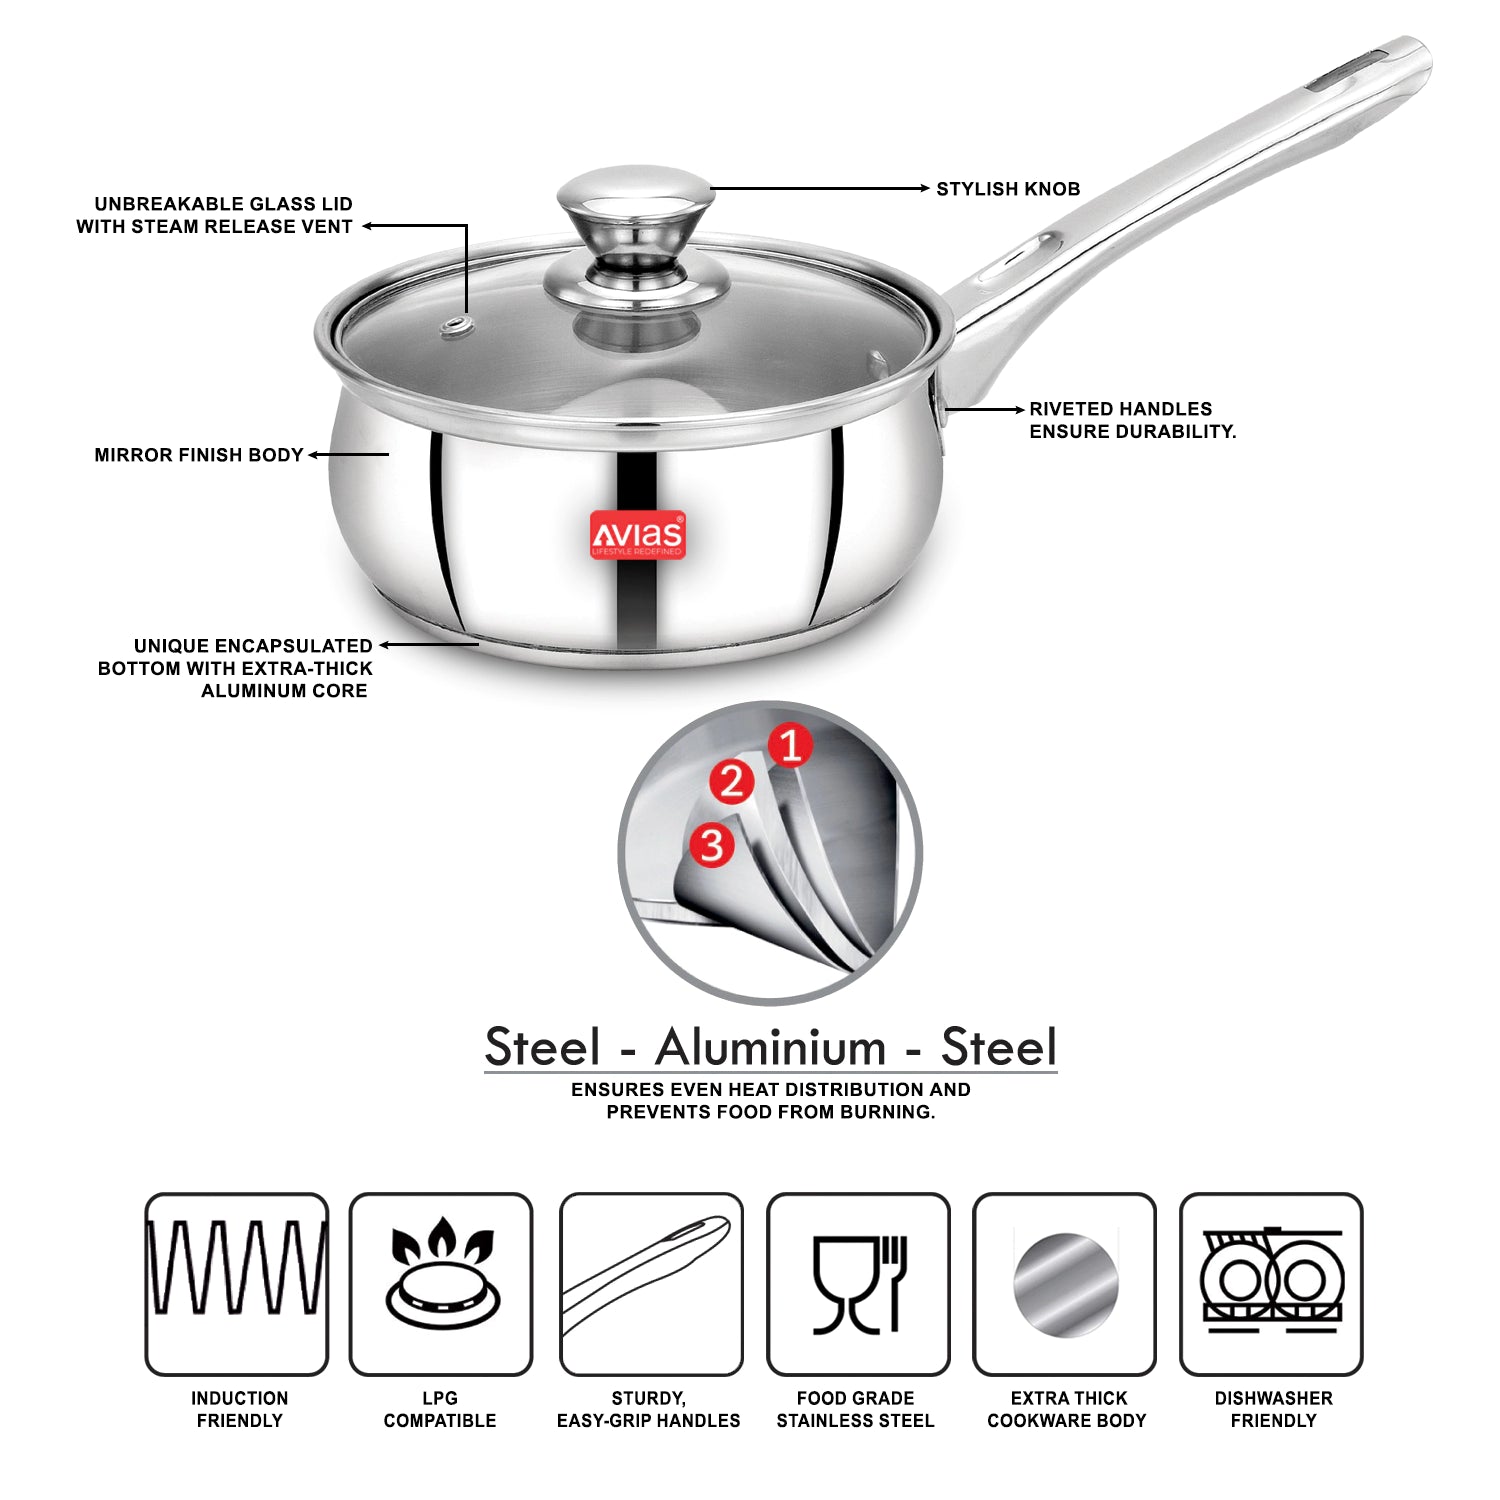 AVIAS Inox IB stainless Steel Saucepan features and compatibility